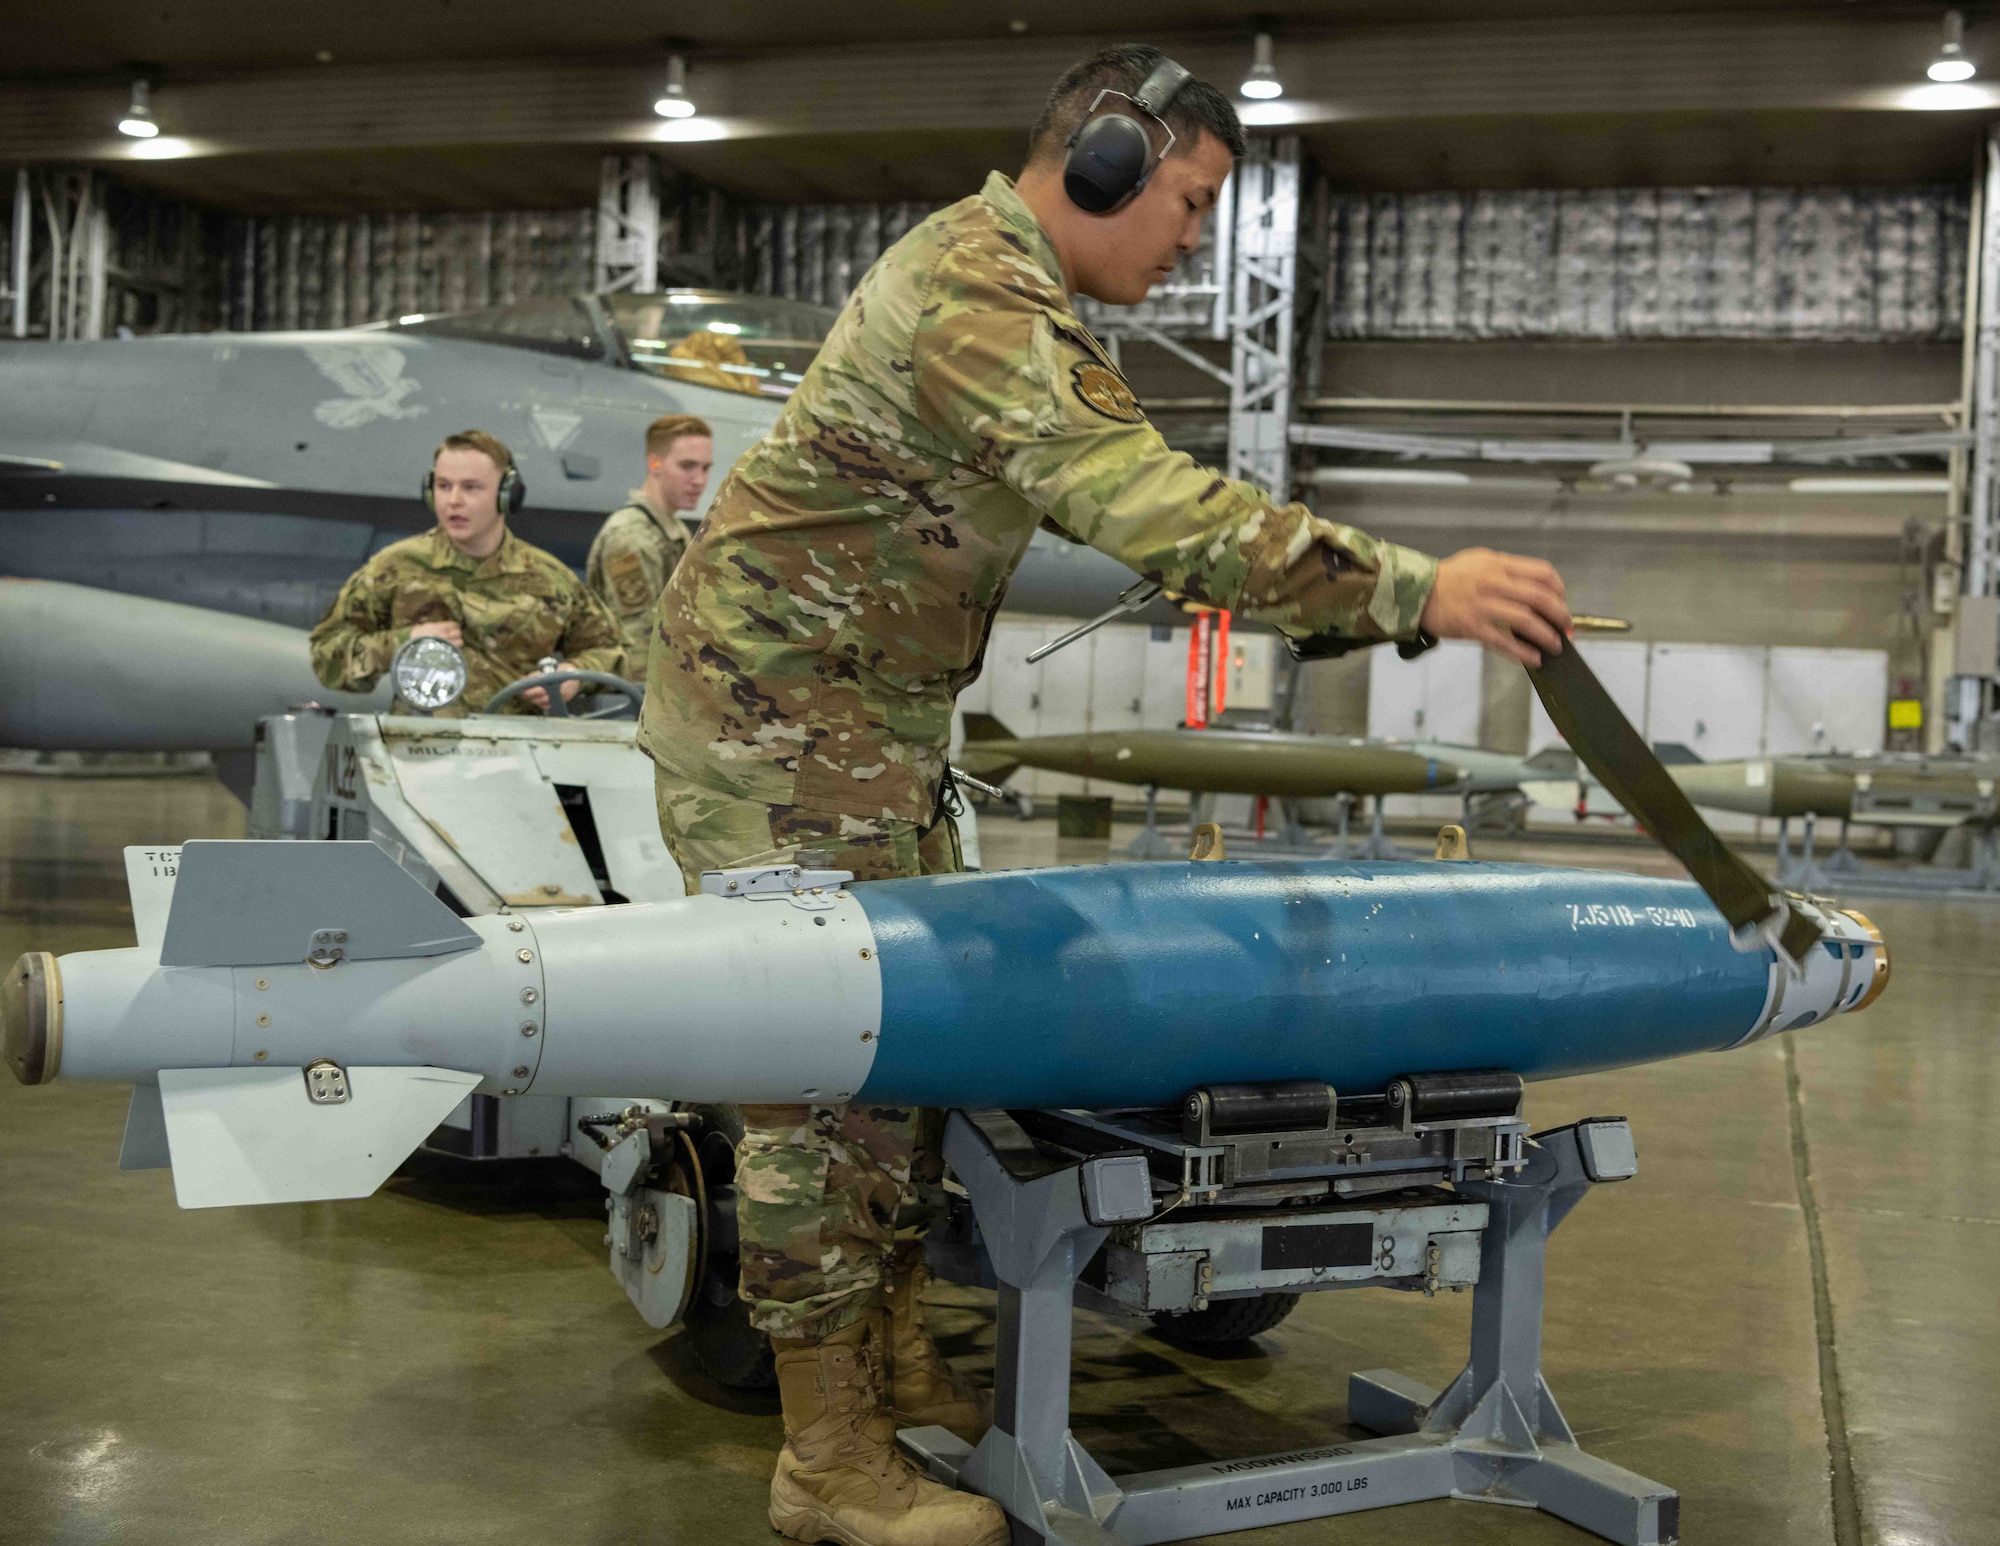 U.S. Air Force Staff Sgt. Anferne Phrachansiri, 14th Aircraft Maintenance Unit weapons load team chief, secures a training GBU-31 guided bomb, before loading it onto an F-16 Fighting Falcon during the second quarter load crew competition at Misawa Air Base, Japan, July 1, 2022.